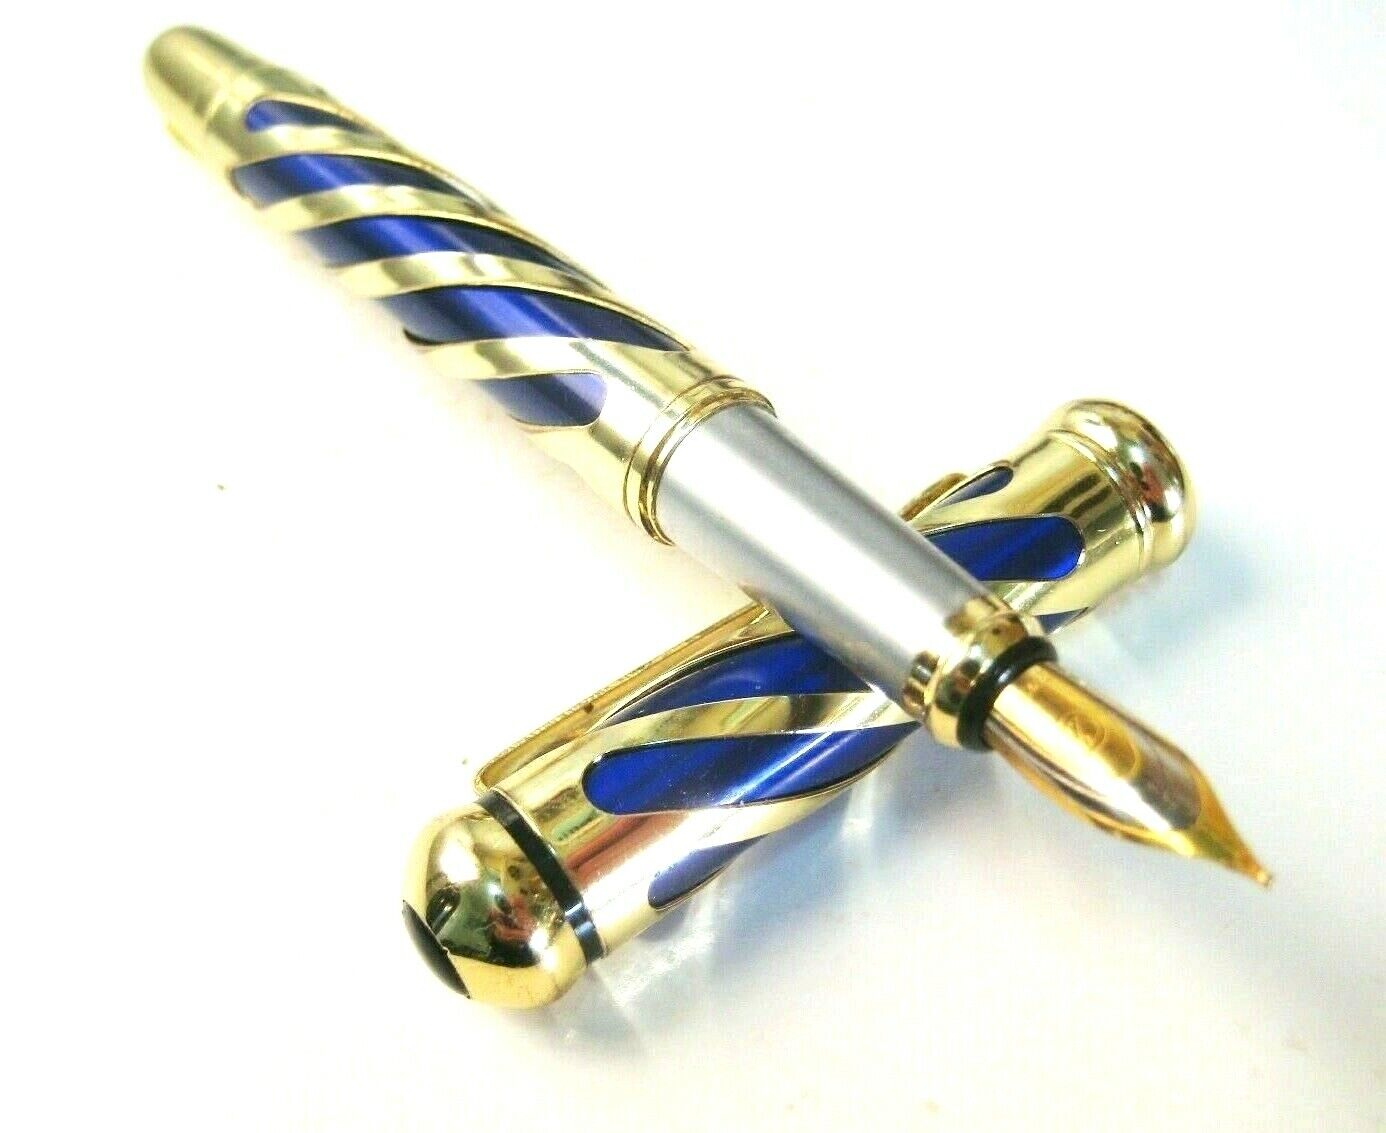 Magnificent Royal Blue and Gold Fountain pen 765L